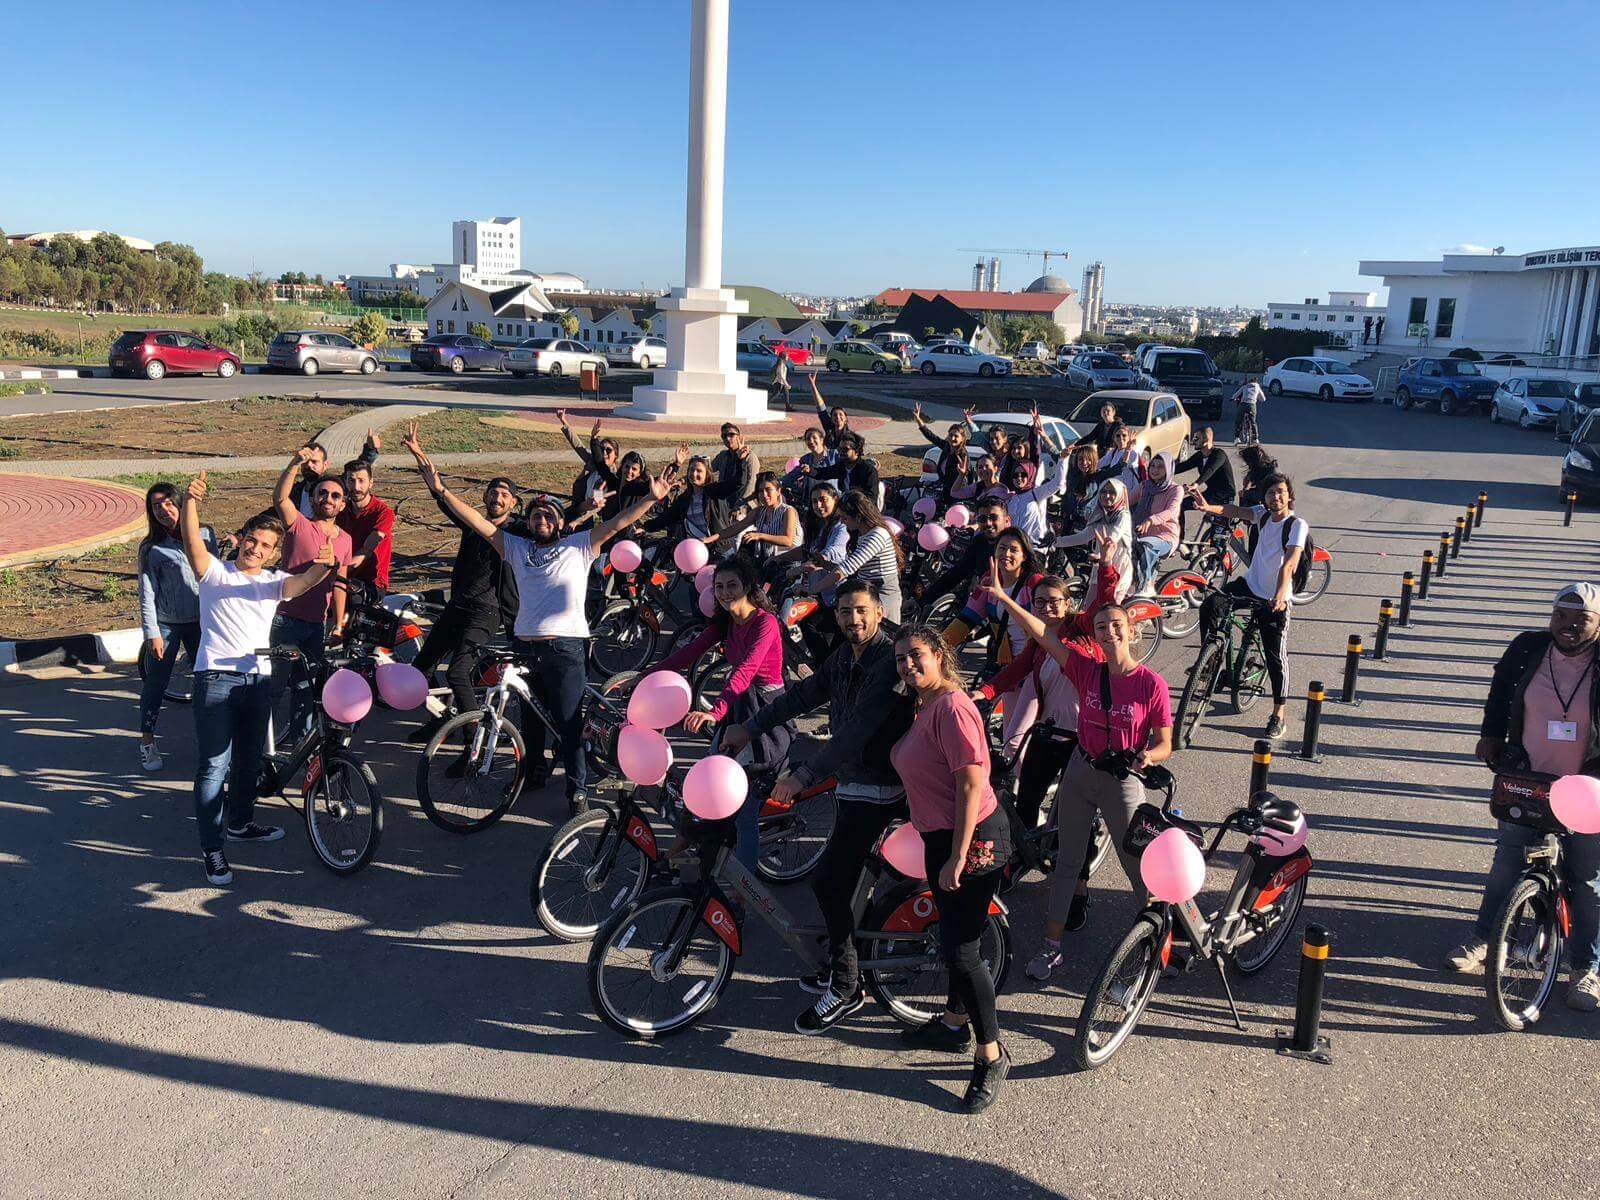 They cycled to draw attention to Breast Cancer